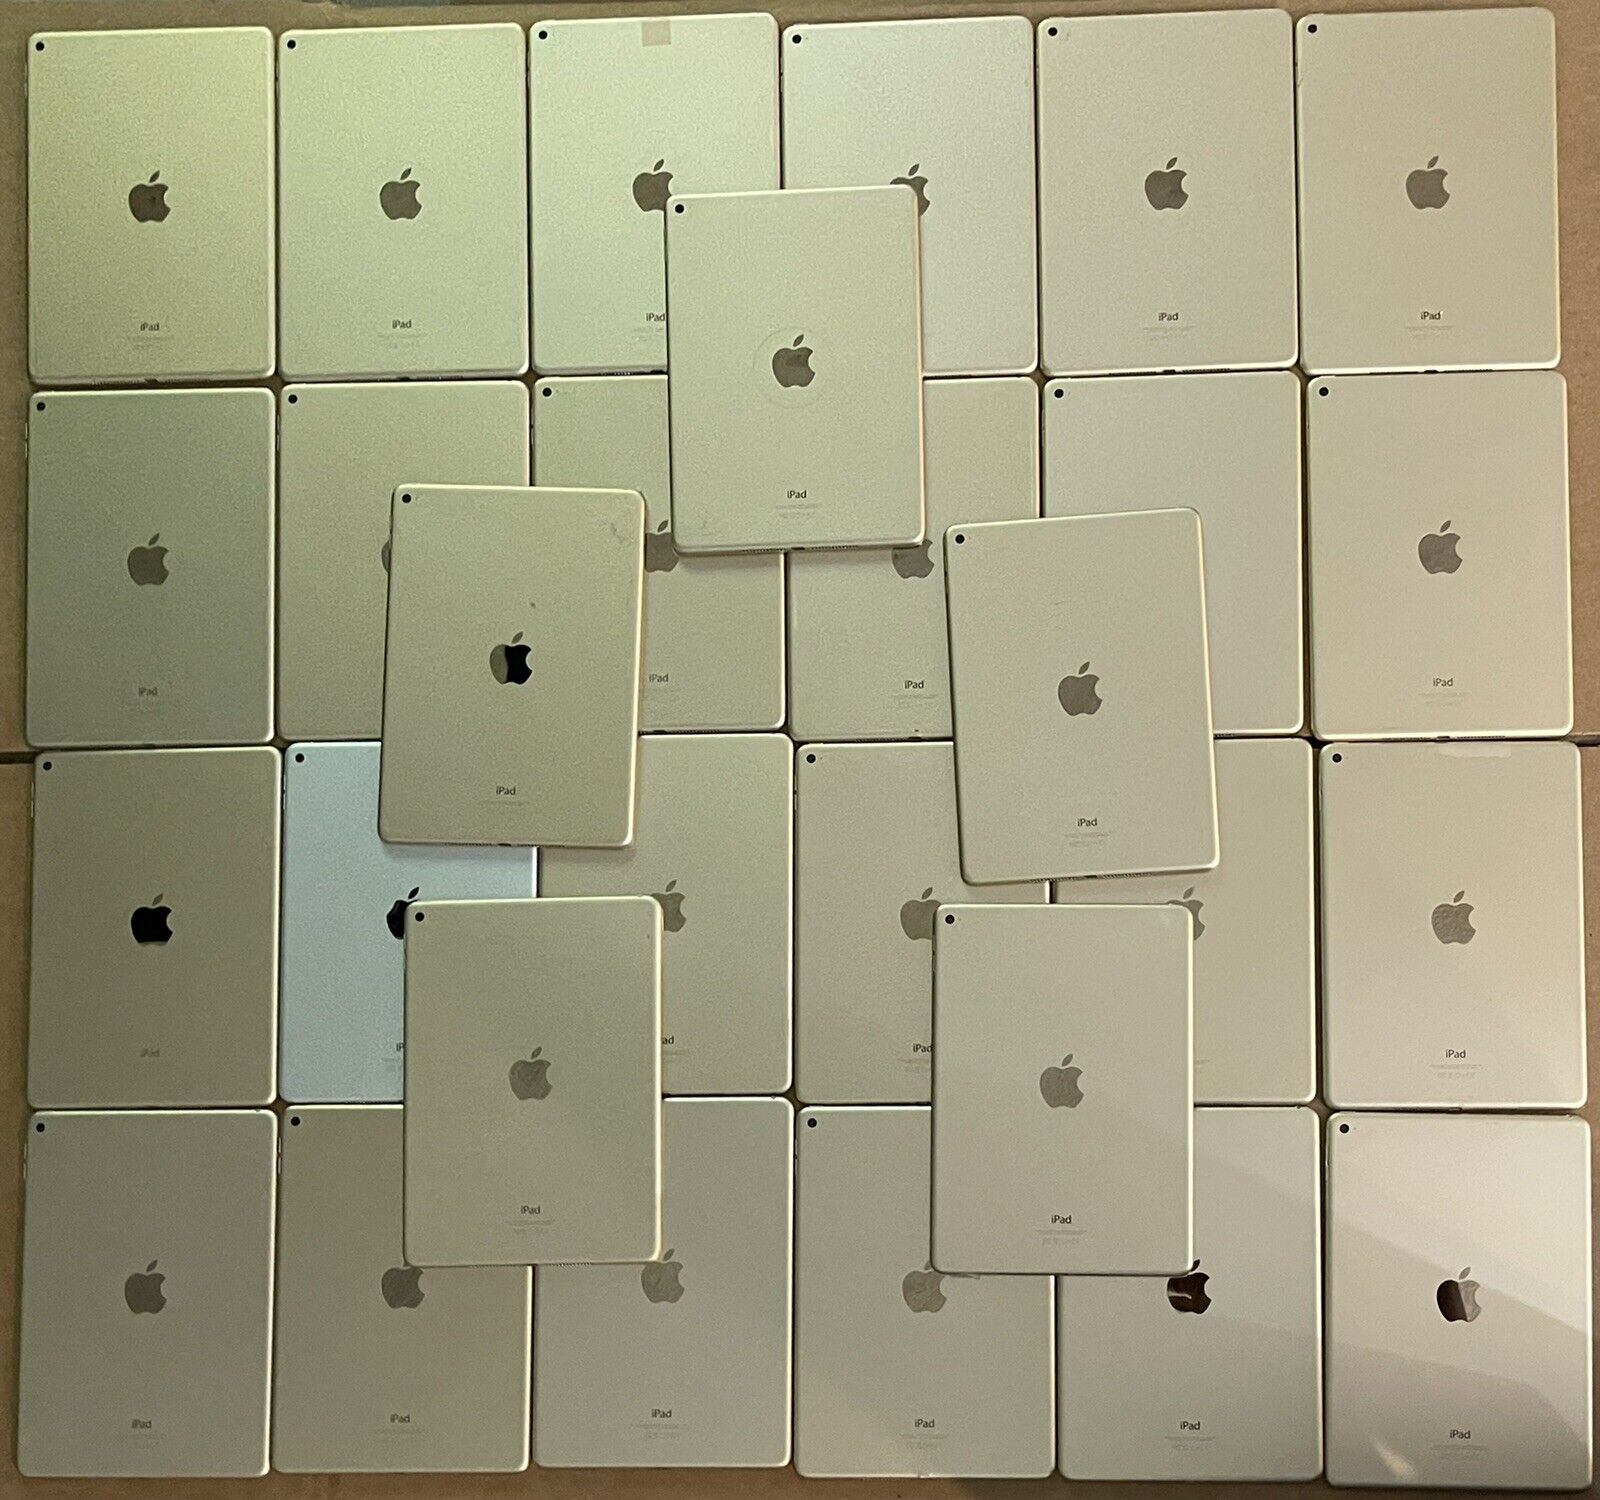 Apple iPad Air 2 16GB A1566 - WIFI - White/Gold FOR PARTS AS IS LOT OF 29 Apple Apple iPad Air 2